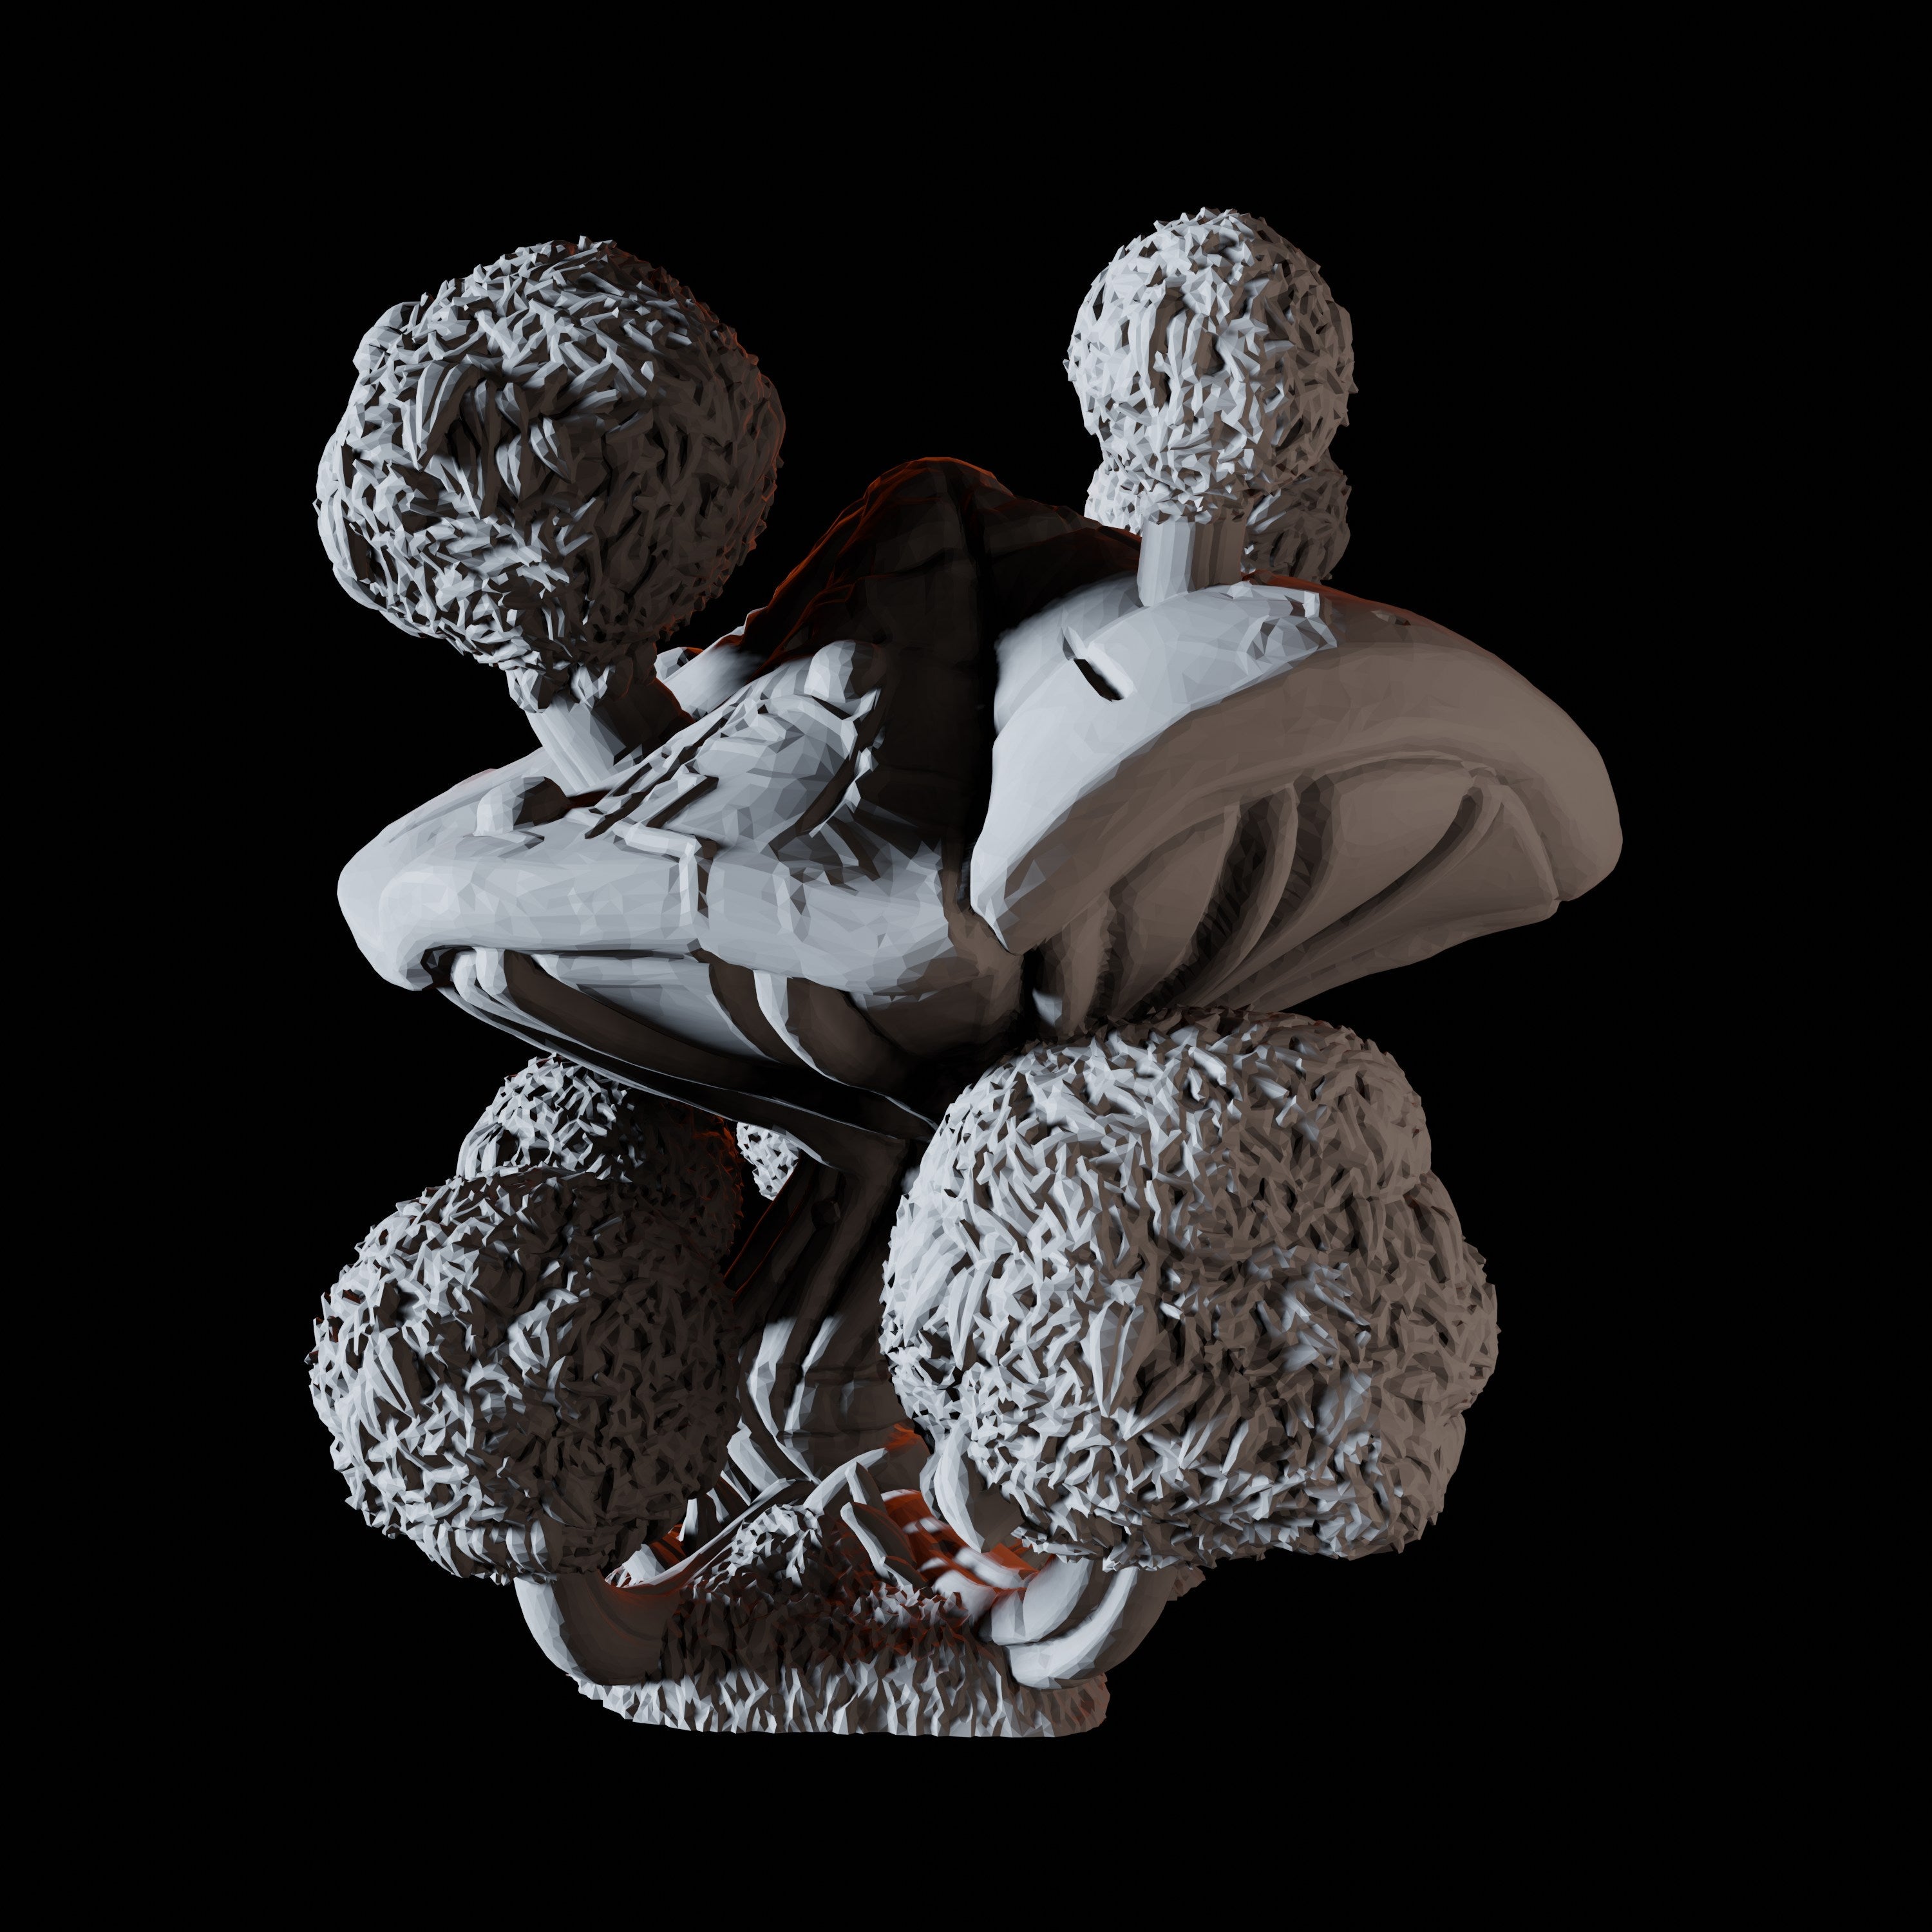 Bushes Mushroom Miniature for Dungeons and Dragons, Pathfinder or other TTRPGs